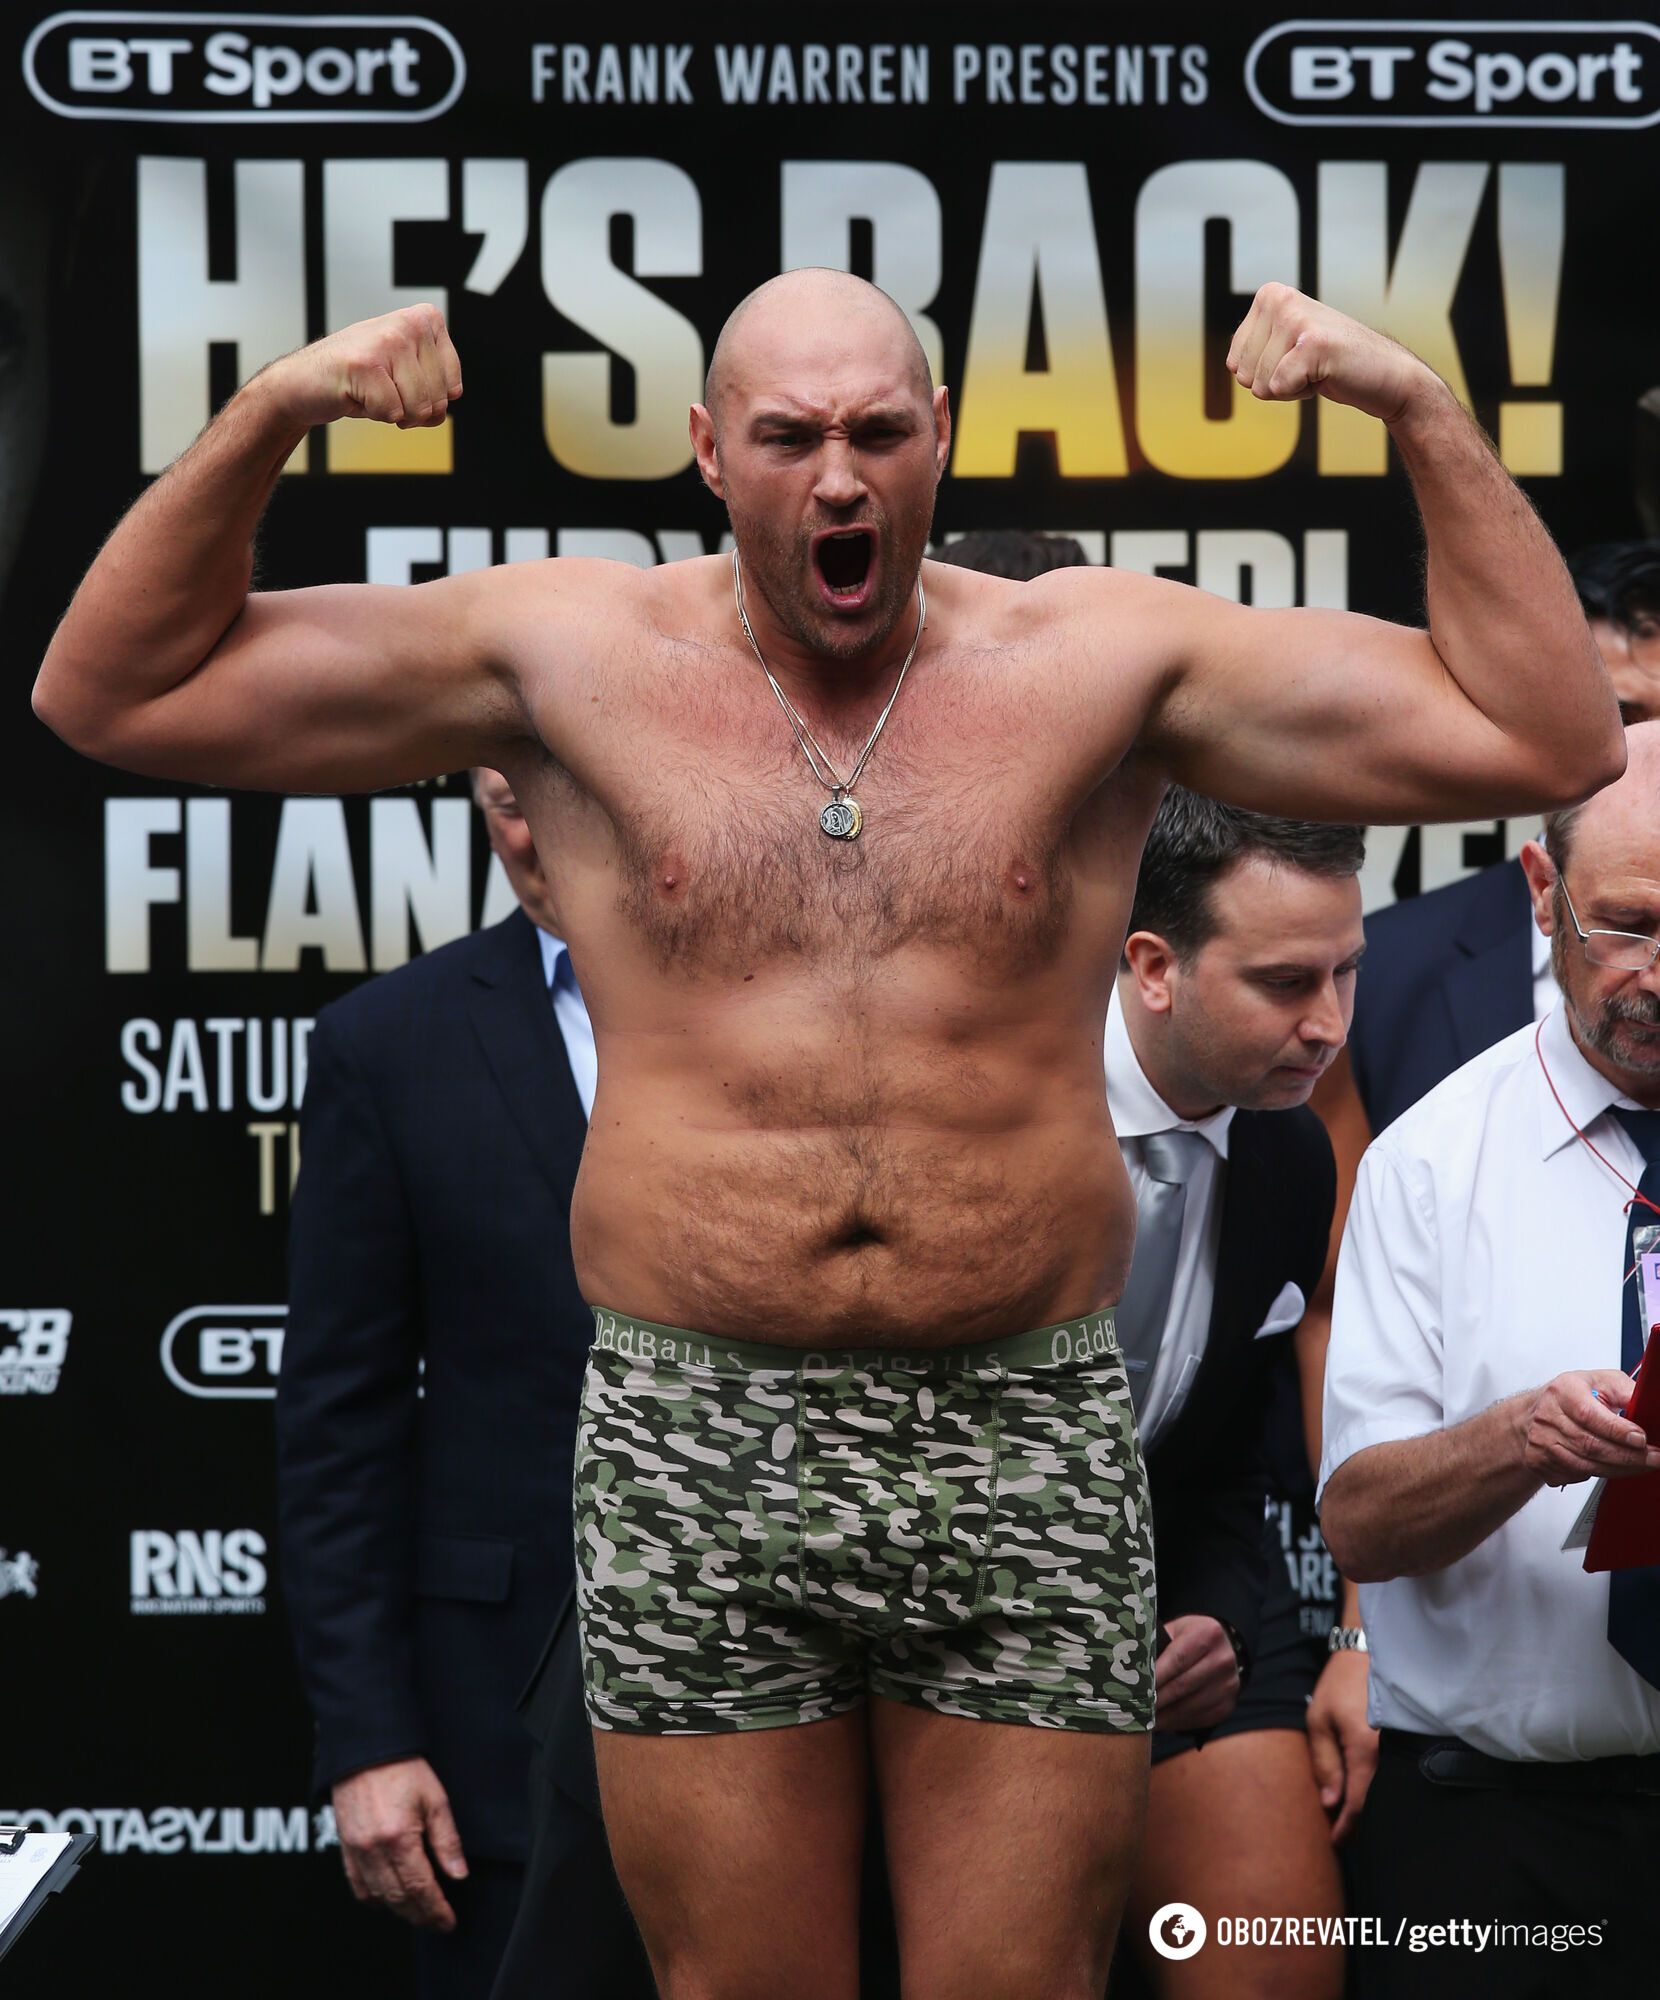 ''Greedy Belly is now evil'': fans criticise Fury over fight with Usyk